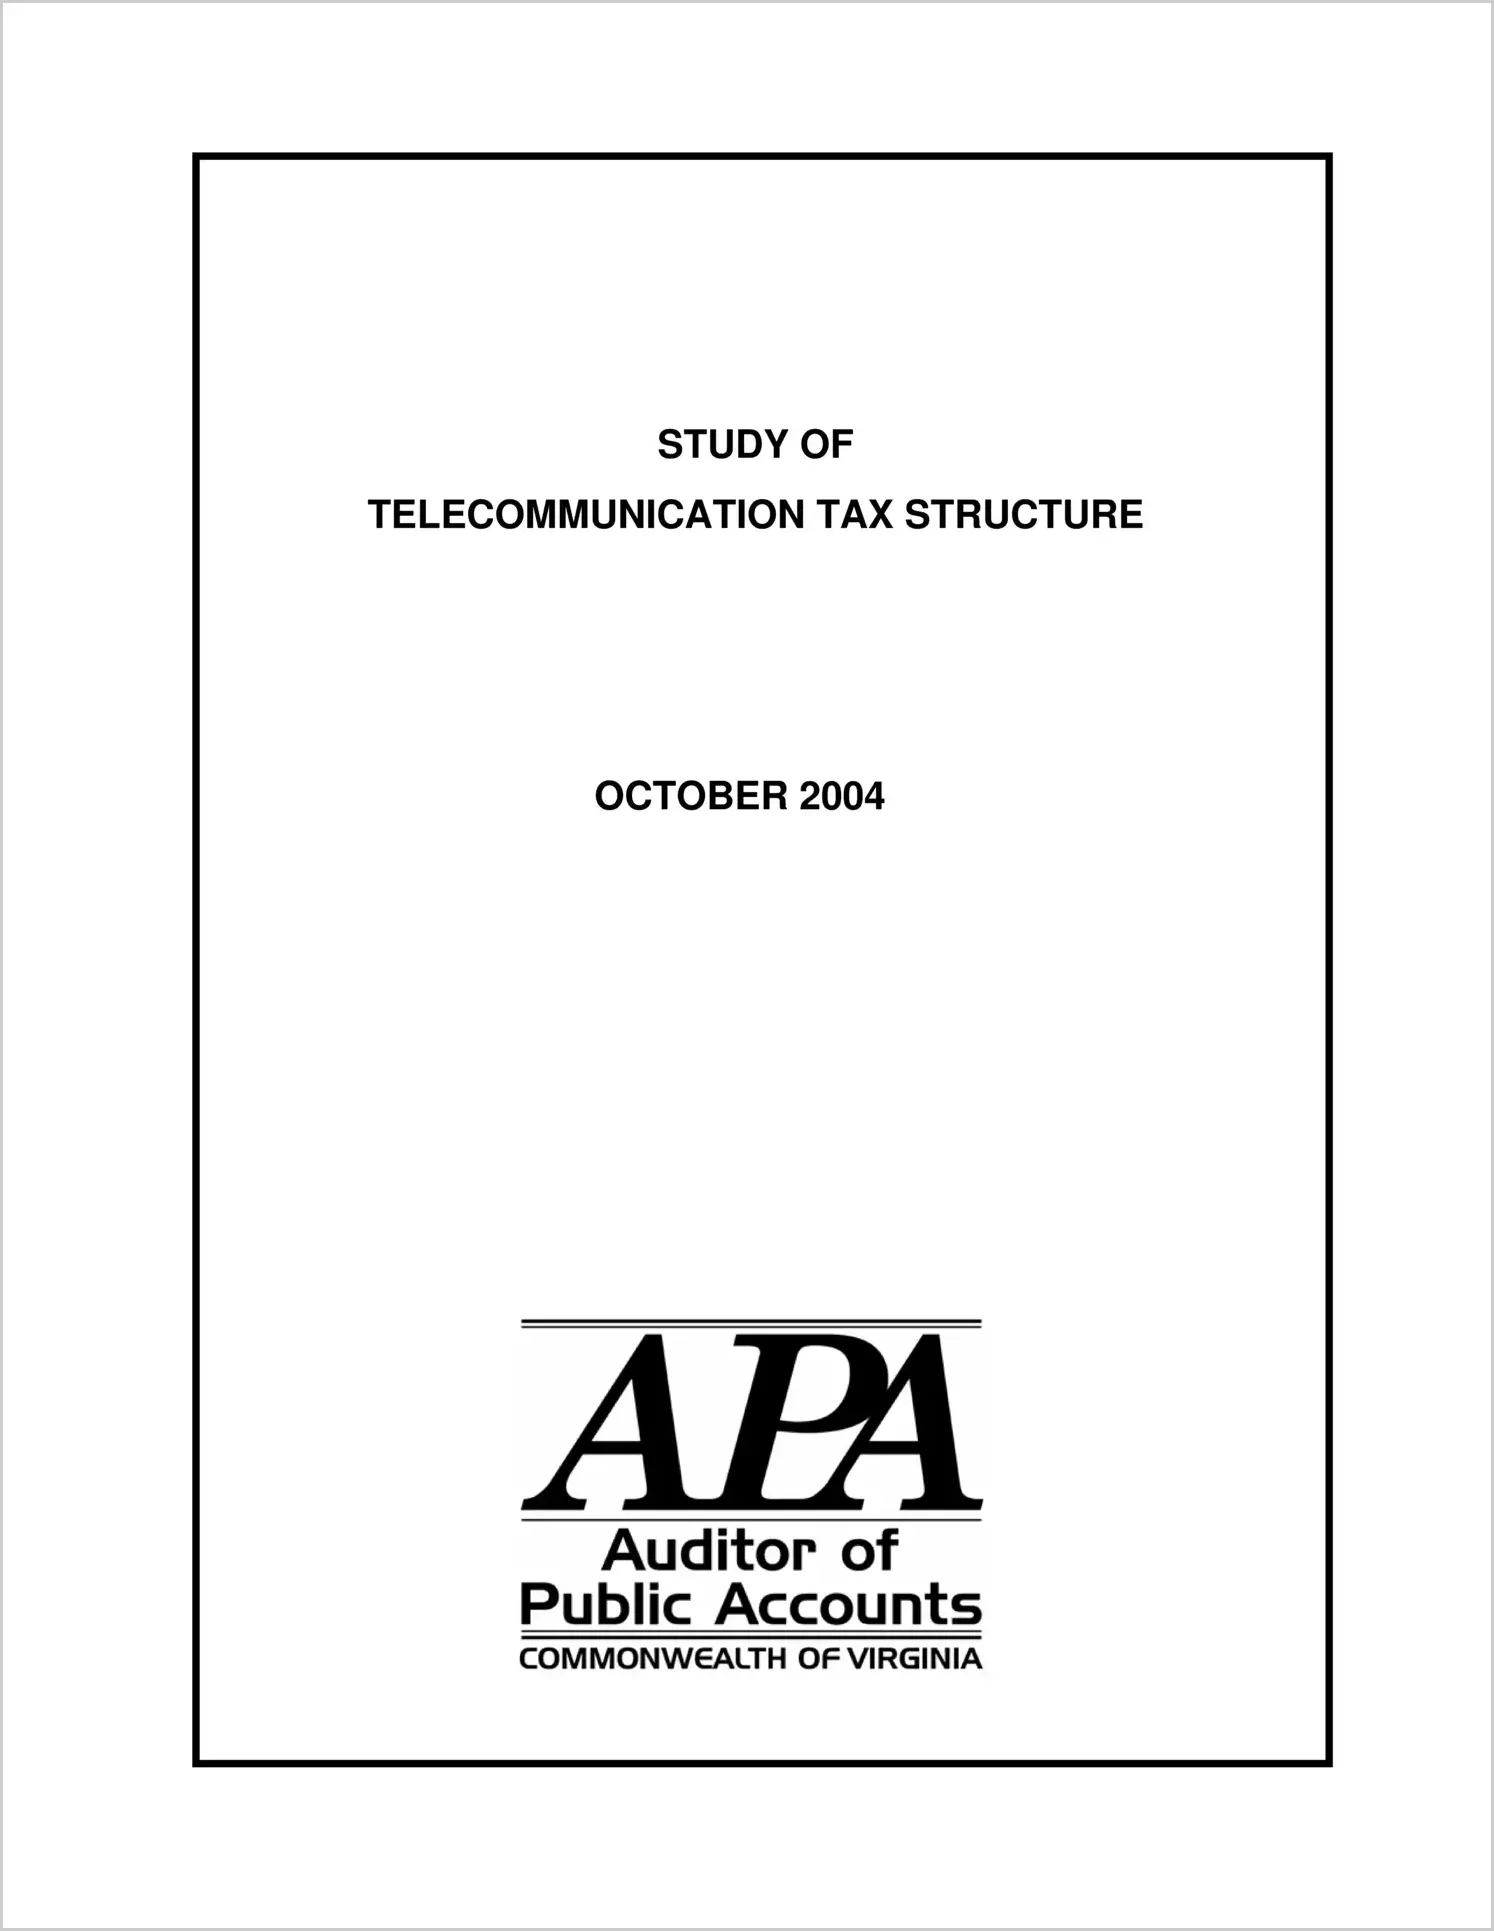 Special ReportStudy of Telecommunication Tax Structure (Report Date: October 2004)